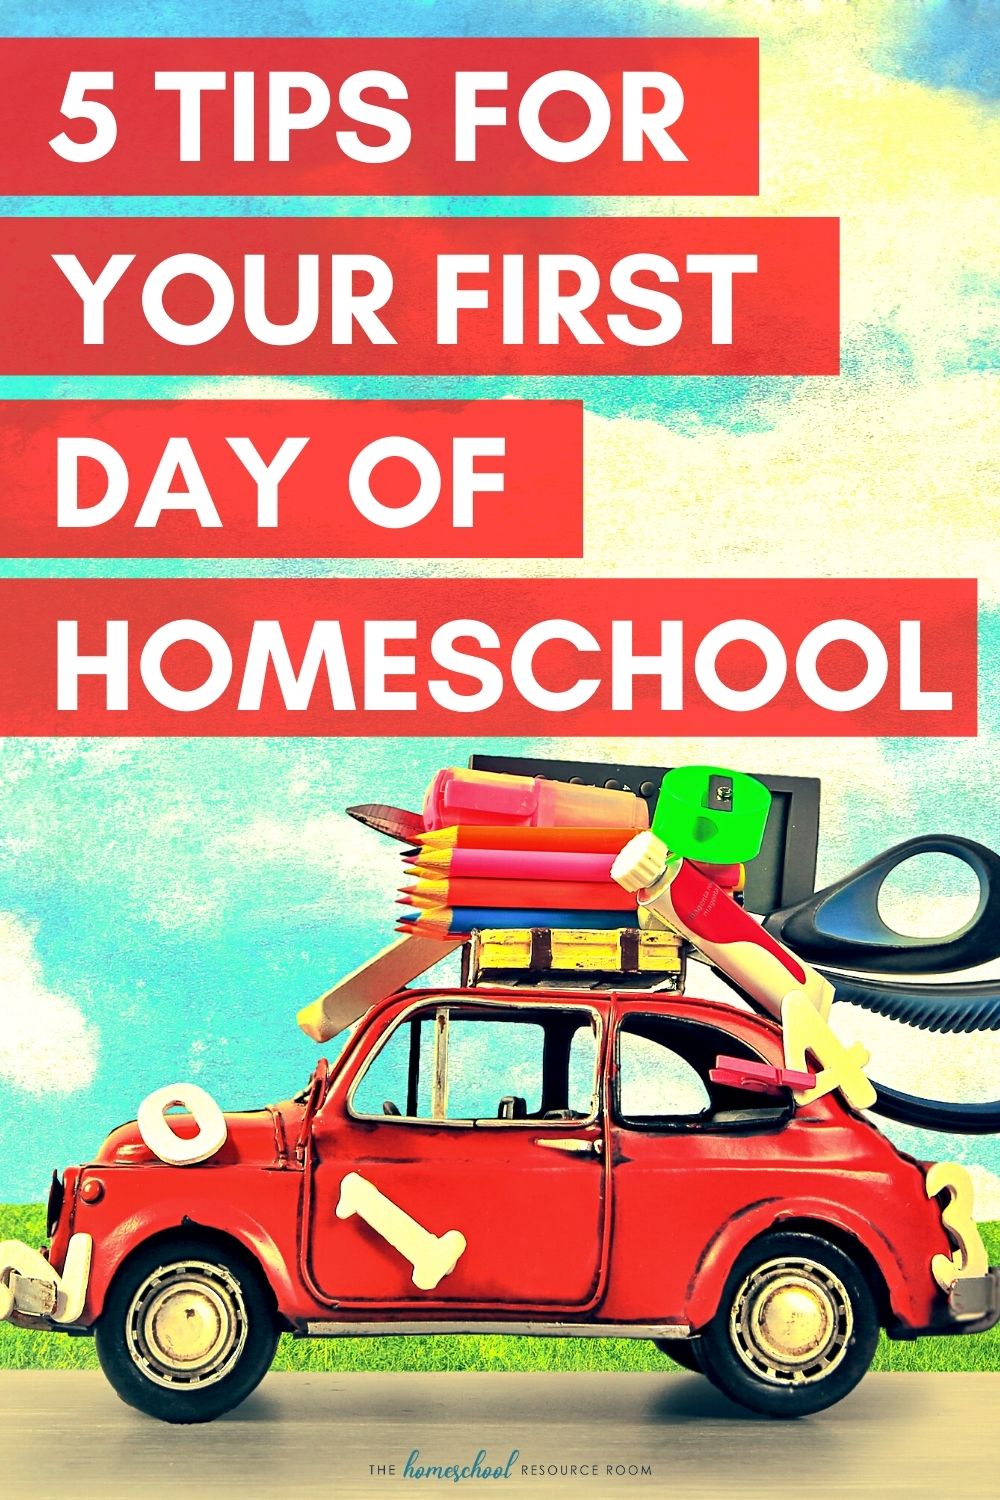 First Day of Homeschool - 5 tips for first day success! #homeschool #homeschooling #backtoschool